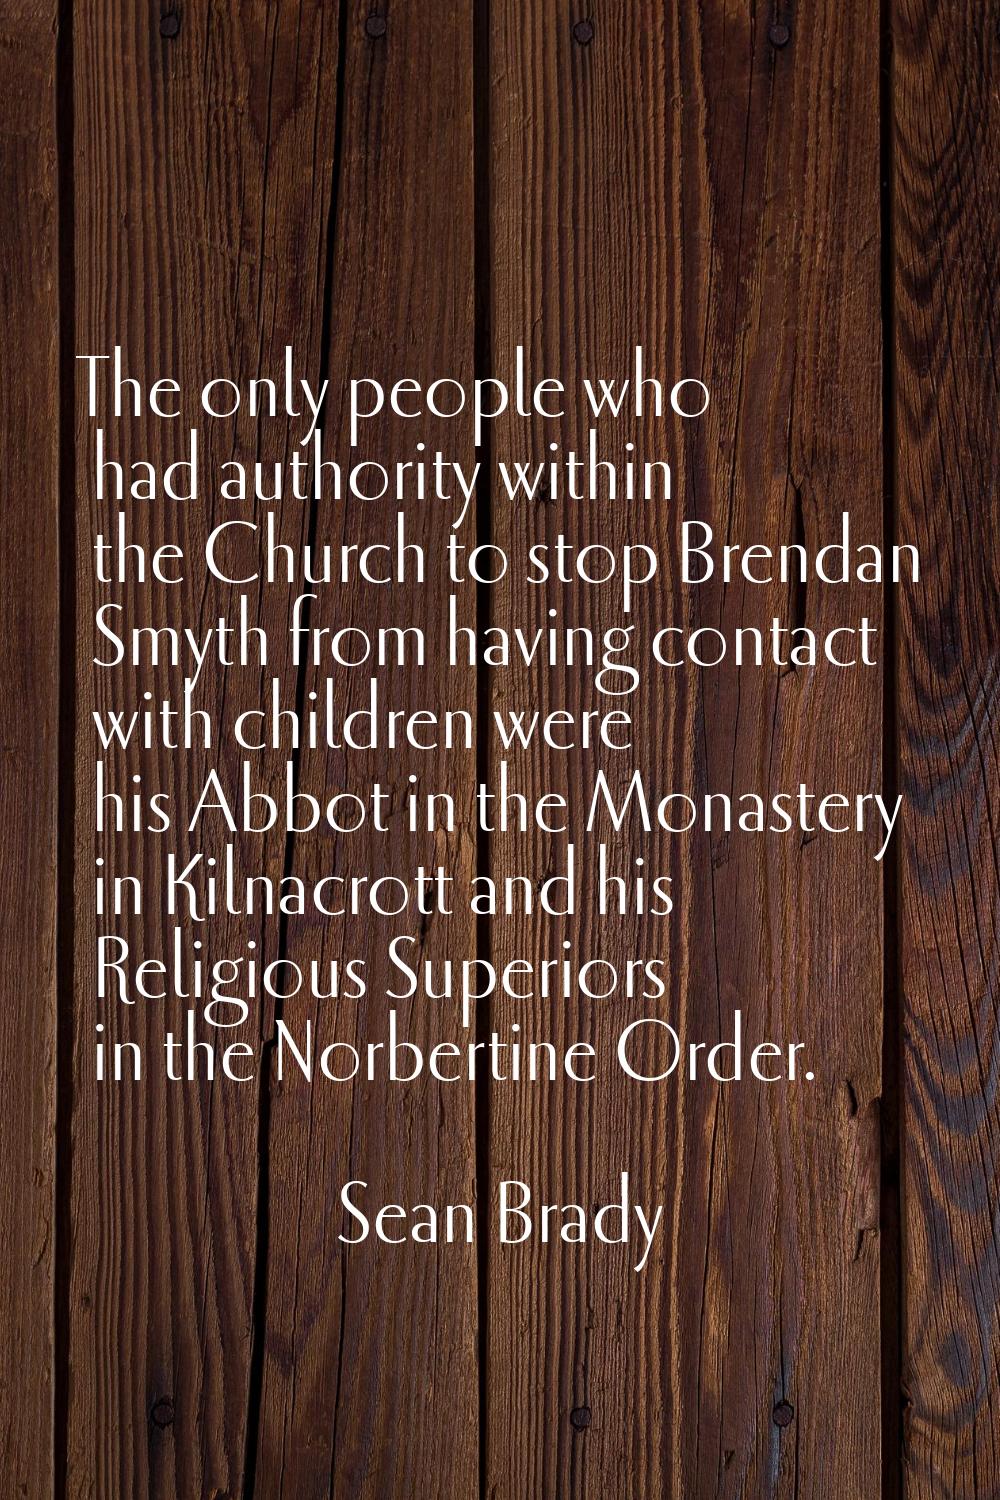 The only people who had authority within the Church to stop Brendan Smyth from having contact with 